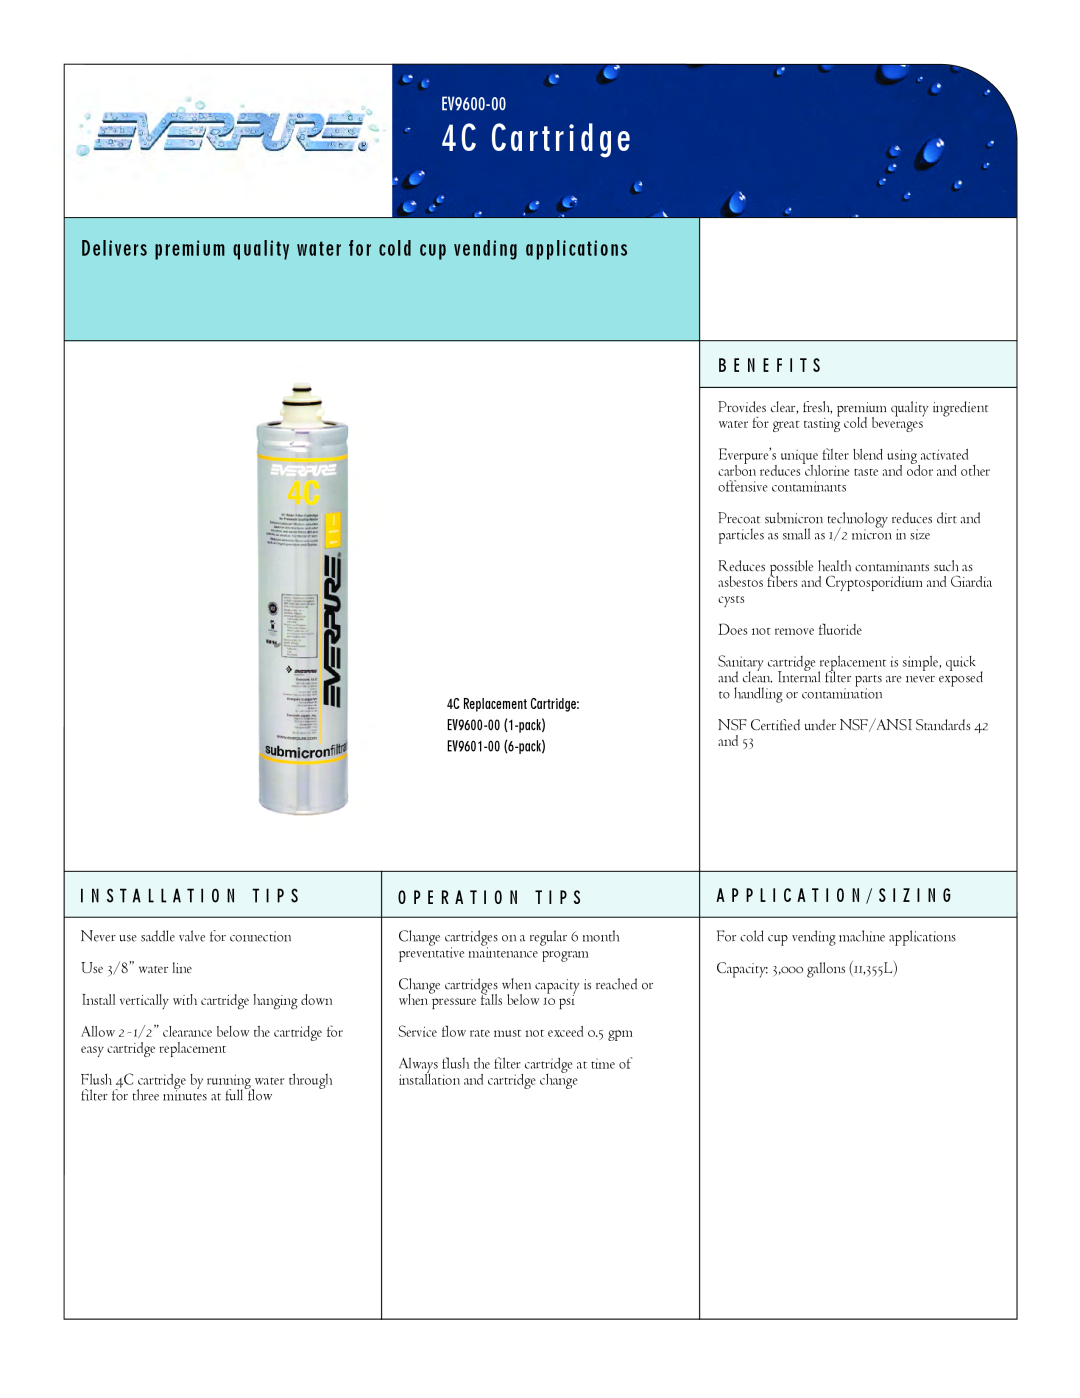 Everpure EV9600-00, EV9601-00 manual 4C Cartridge, Delivers premium quality water for cold cup vending applications 